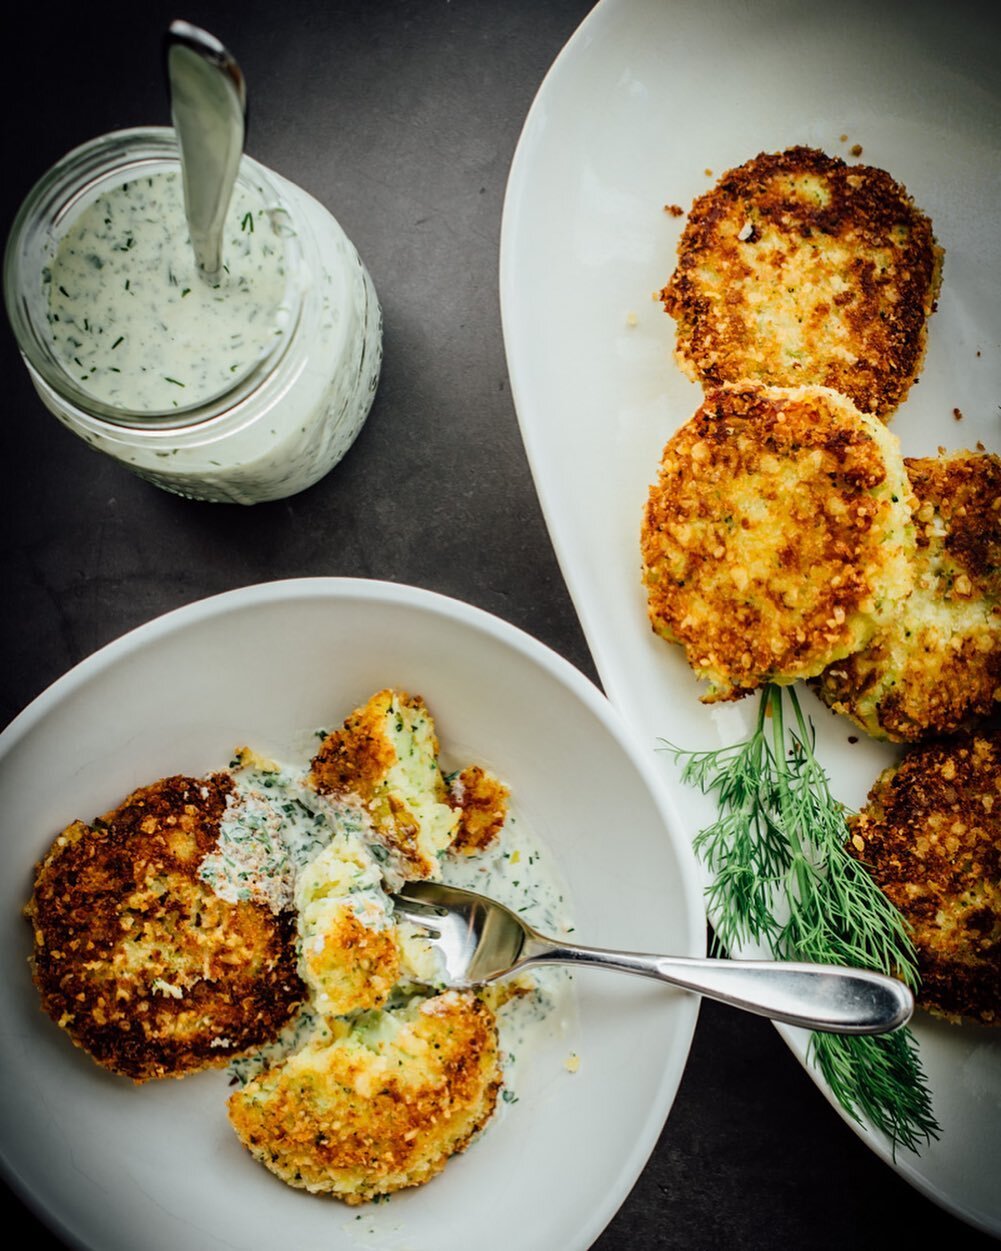 New post up on the blog today: Potato and Broccoli Cakes + Charred Scallion Yogurt Sauce. The recipe is adapted from @sk_cookingclub. I&rsquo;ve made them a few times now, they&rsquo;re super good and finally I made all 8 cakes without them falling a